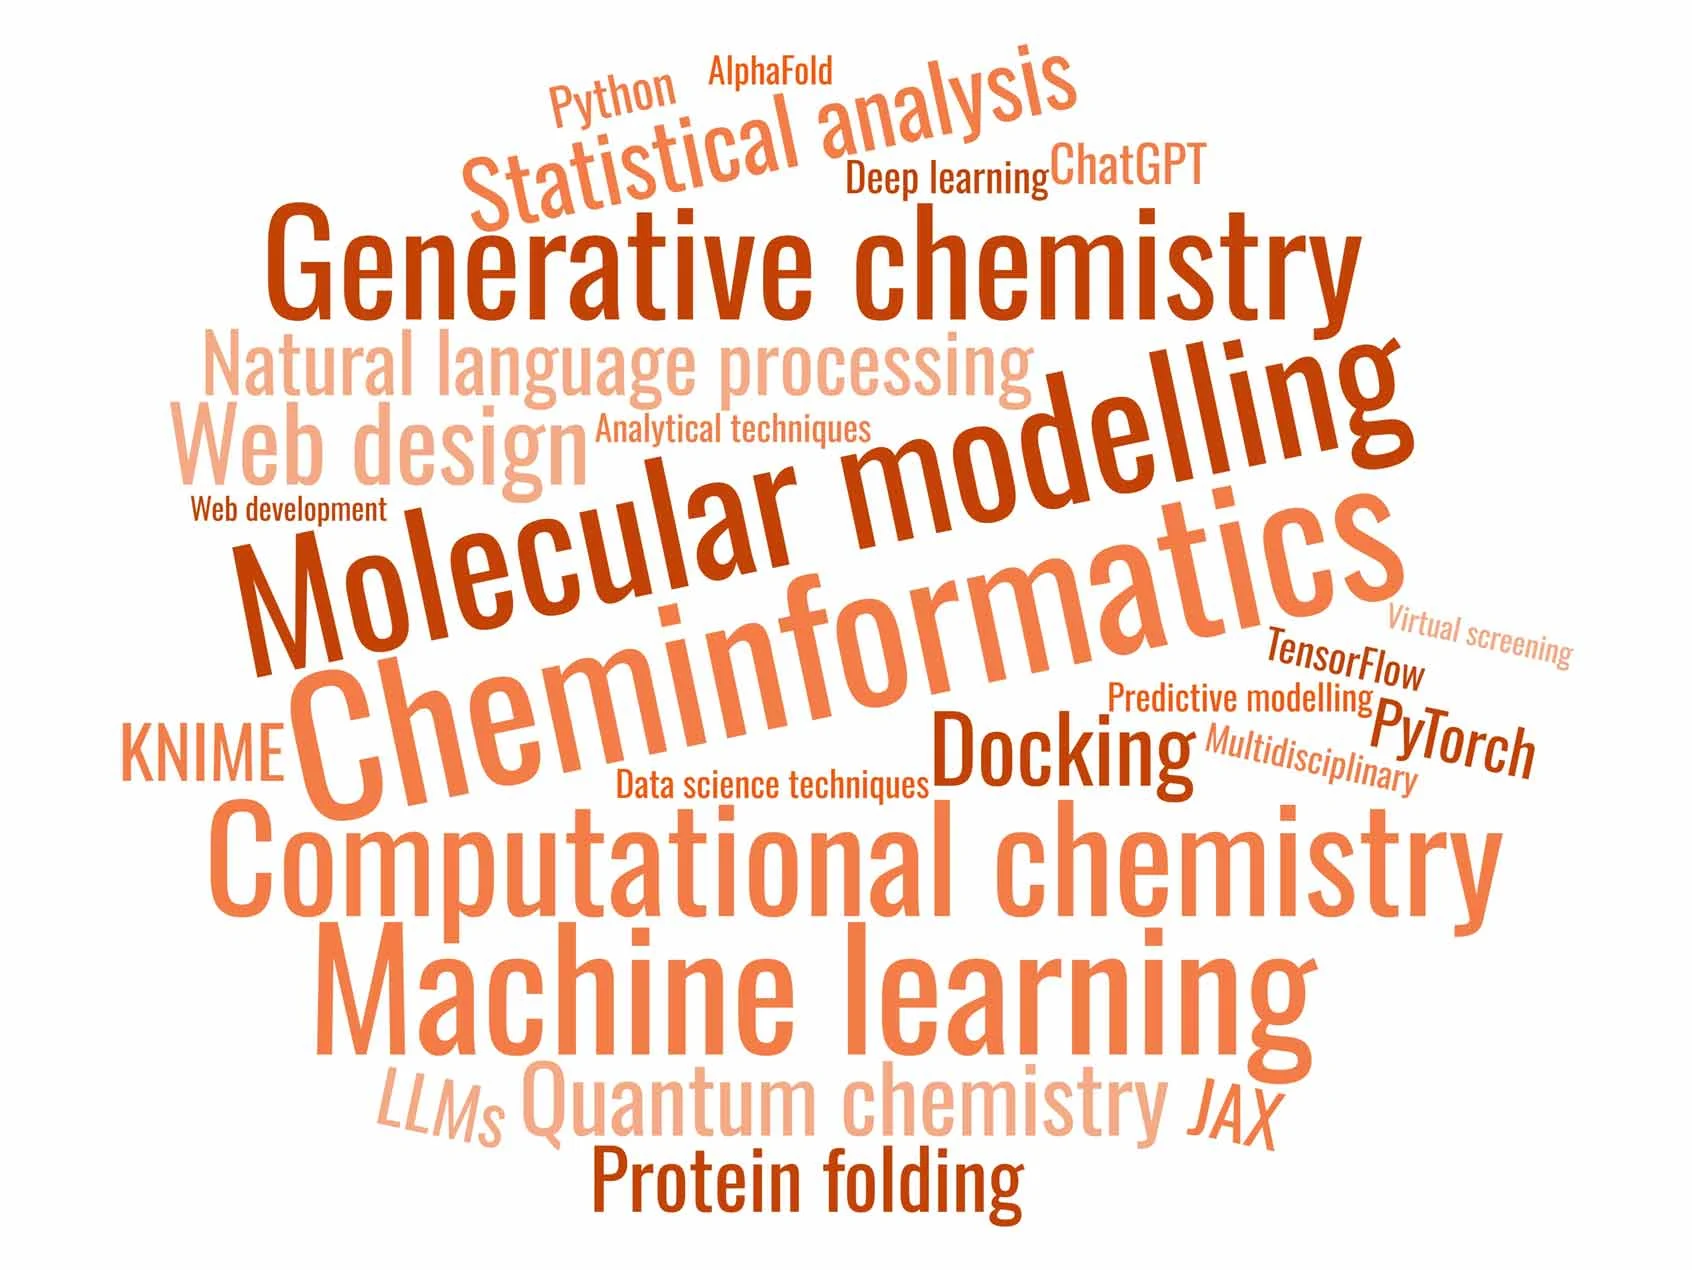 Word cloud of skills and areas of exploration for the AI-enabled chemist of the future